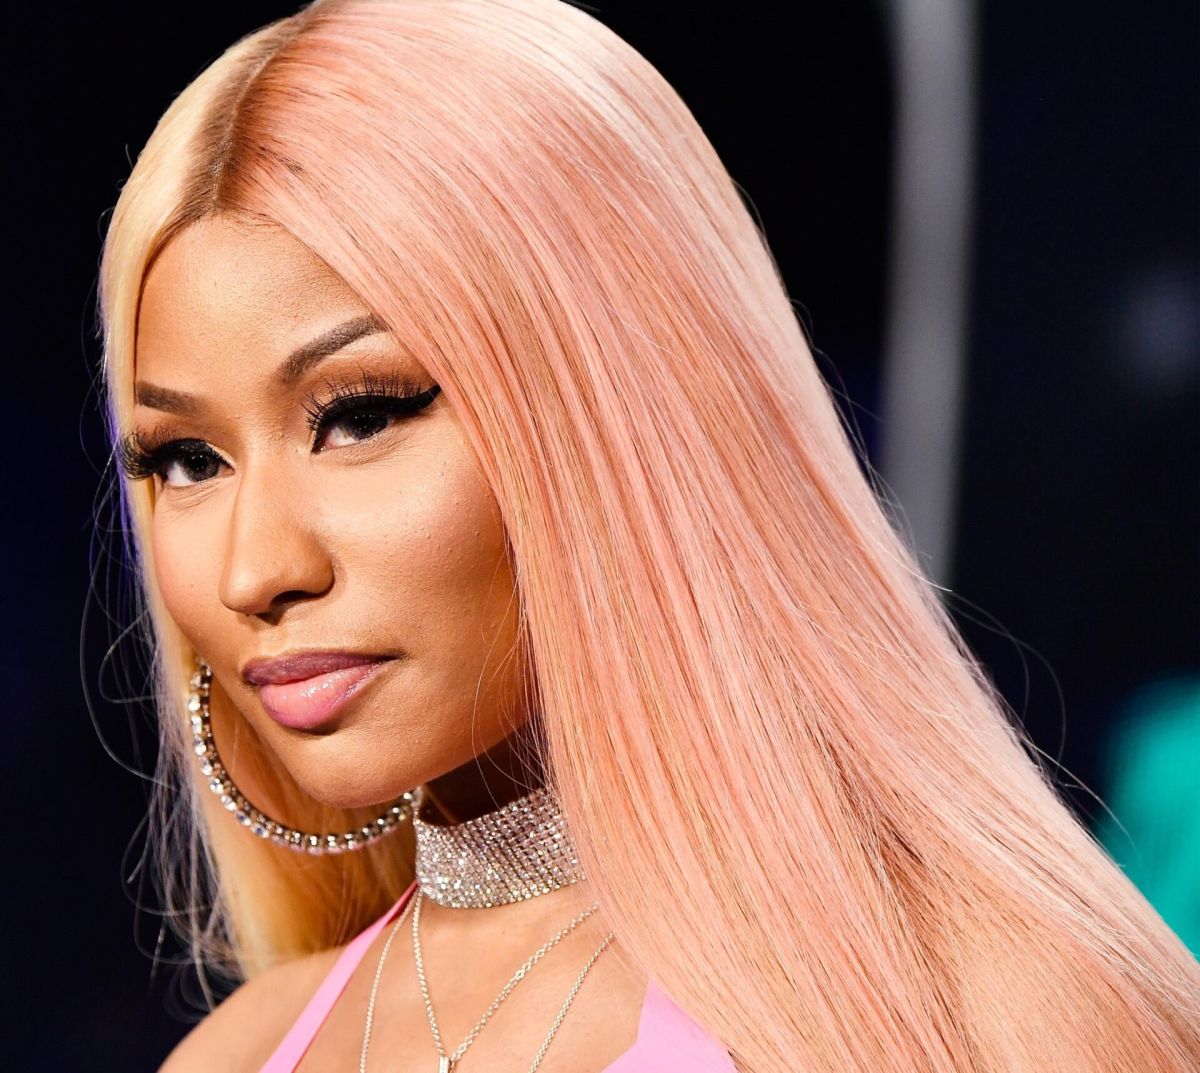 Nicki Minaj Releases Trailer For ‘Do We Have A Problem?’ With Lil Baby 1